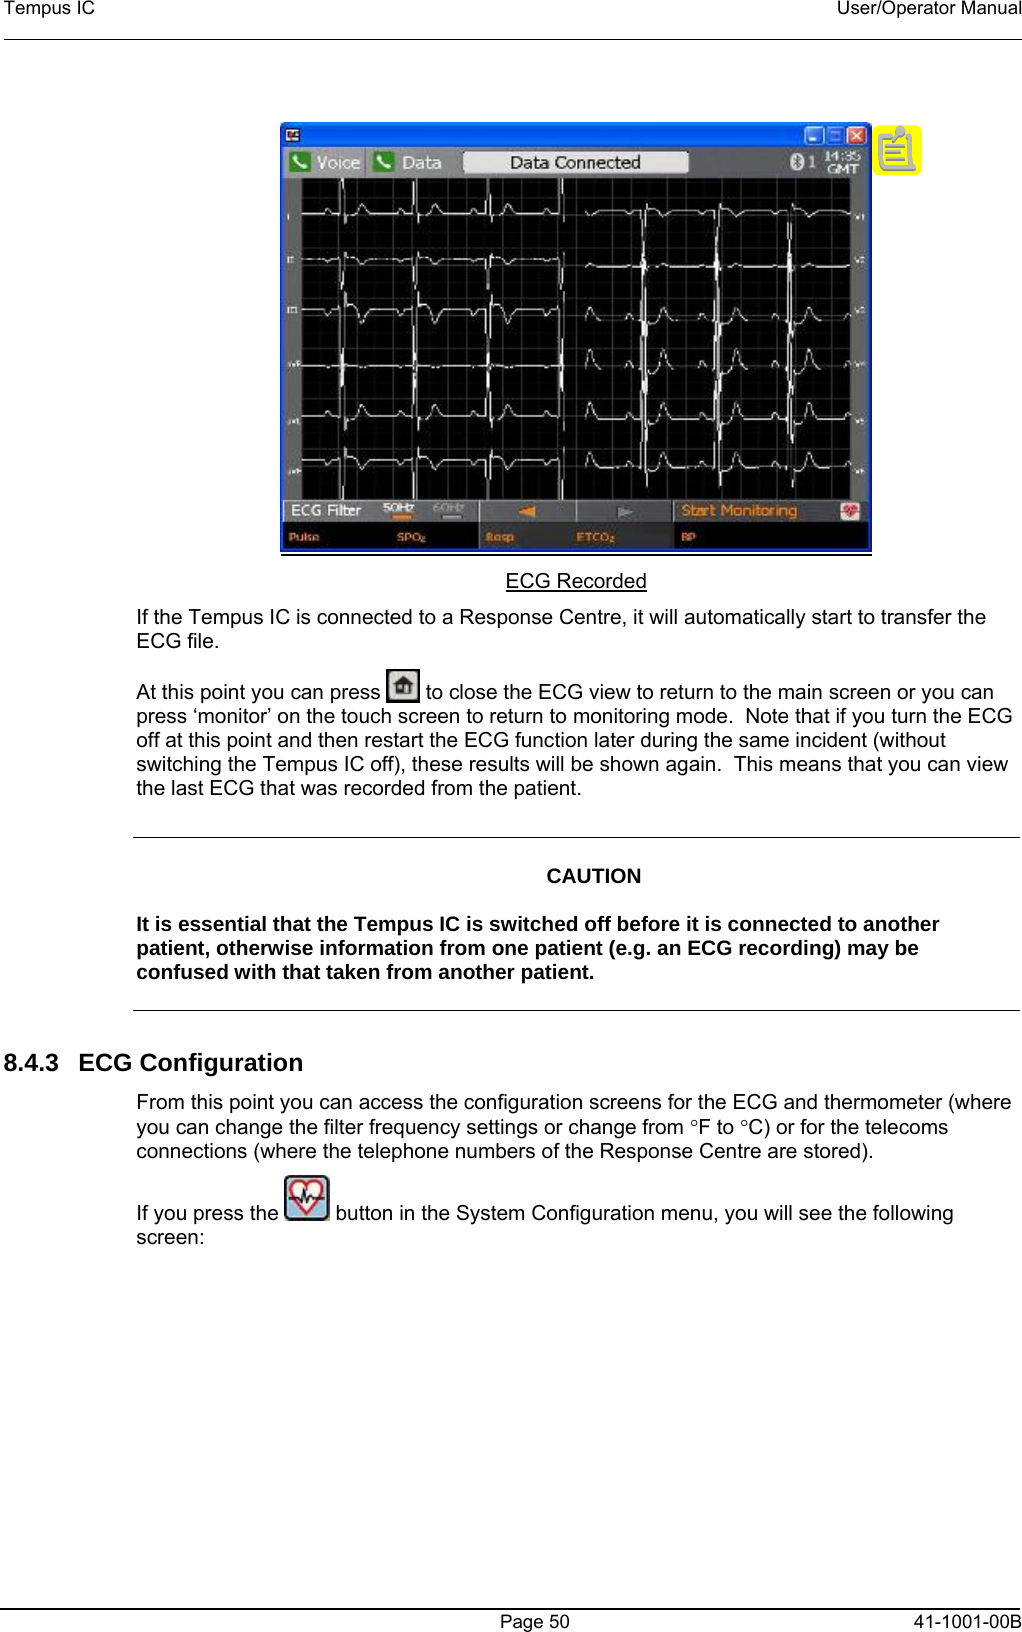 Tempus IC    User/Operator Manual      ECG Recorded If the Tempus IC is connected to a Response Centre, it will automatically start to transfer the ECG file.   At this point you can press   to close the ECG view to return to the main screen or you can press ‘monitor’ on the touch screen to return to monitoring mode.  Note that if you turn the ECG off at this point and then restart the ECG function later during the same incident (without switching the Tempus IC off), these results will be shown again.  This means that you can view the last ECG that was recorded from the patient.     CAUTION  It is essential that the Tempus IC is switched off before it is connected to another patient, otherwise information from one patient (e.g. an ECG recording) may be confused with that taken from another patient.    8.4.3 ECG Configuration From this point you can access the configuration screens for the ECG and thermometer (where you can change the filter frequency settings or change from °F to °C) or for the telecoms connections (where the telephone numbers of the Response Centre are stored). If you press the   button in the System Configuration menu, you will see the following screen:   Page 50   41-1001-00B 